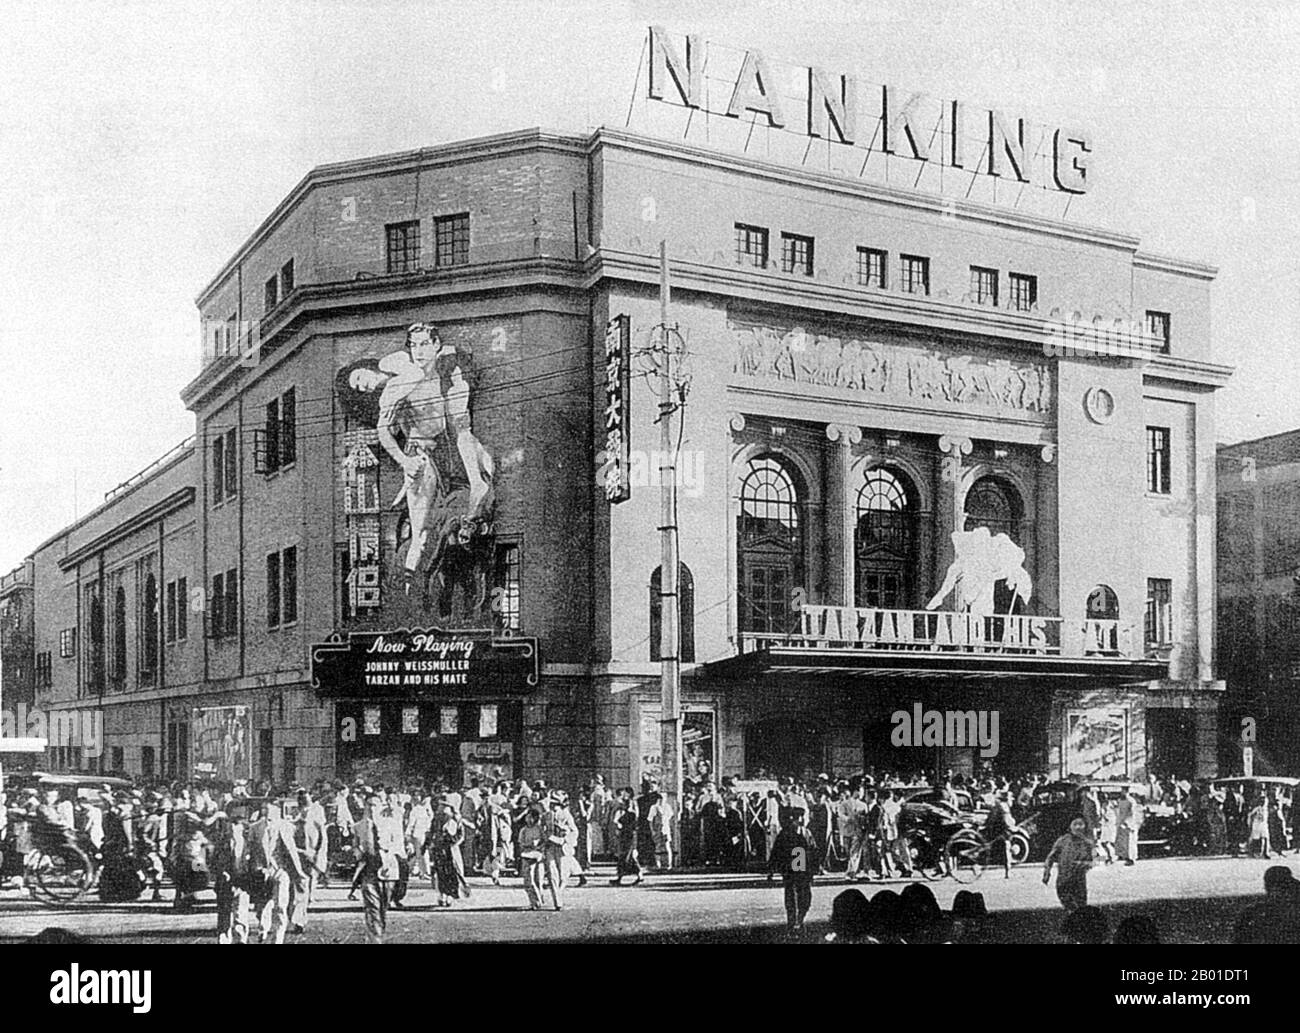 China: The Nanking Theatre showing 'Tarzan and His Mate', Shanghai, 1934.  Shanghai (Chinese: 上 海; Pinyin Shànghǎi) is one of the largest cities by population in the People's Republic of China, and the world. The city is located in eastern China, at the middle portion of the Chinese coast, and sits at the mouth of the Yangtze River. Due to its rapid growth over the last two decades it has again become a global city, exerting influence over finance, commerce, fashion, technology and culture.  Once a mere fishing and textiles town, Shanghai grew in importance in the 19th century. Stock Photo